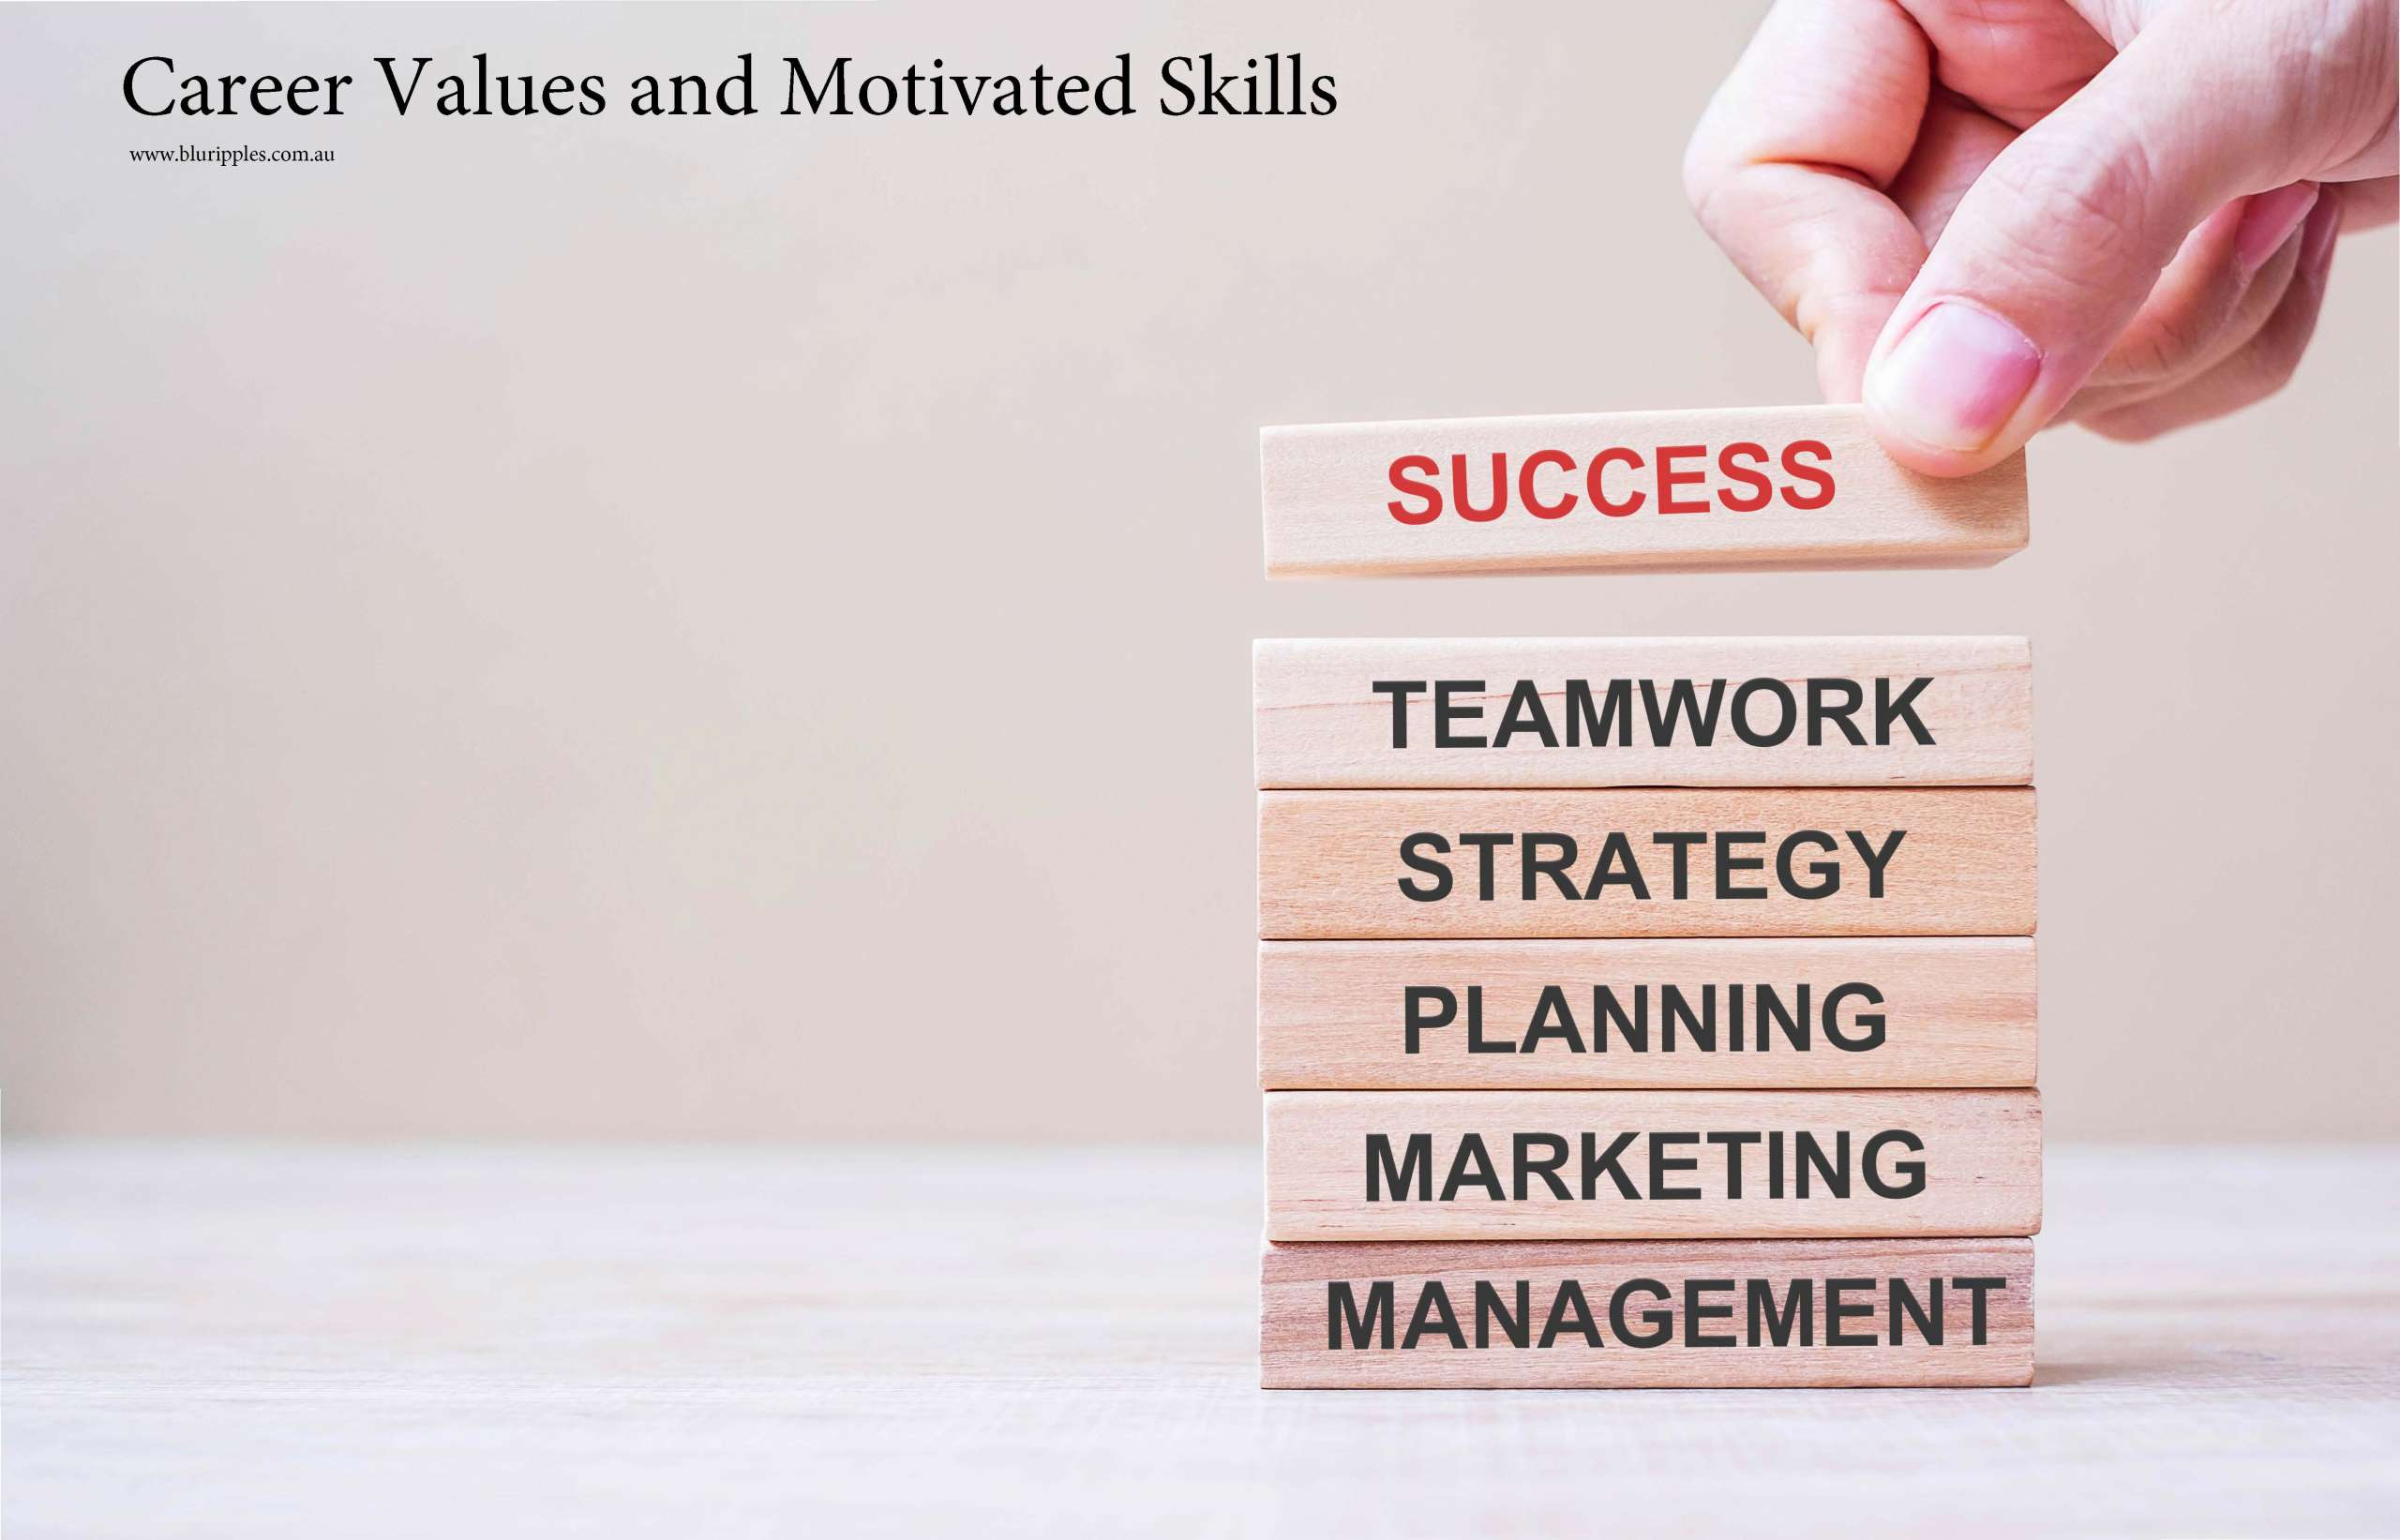 Career Values and Motivated Skills